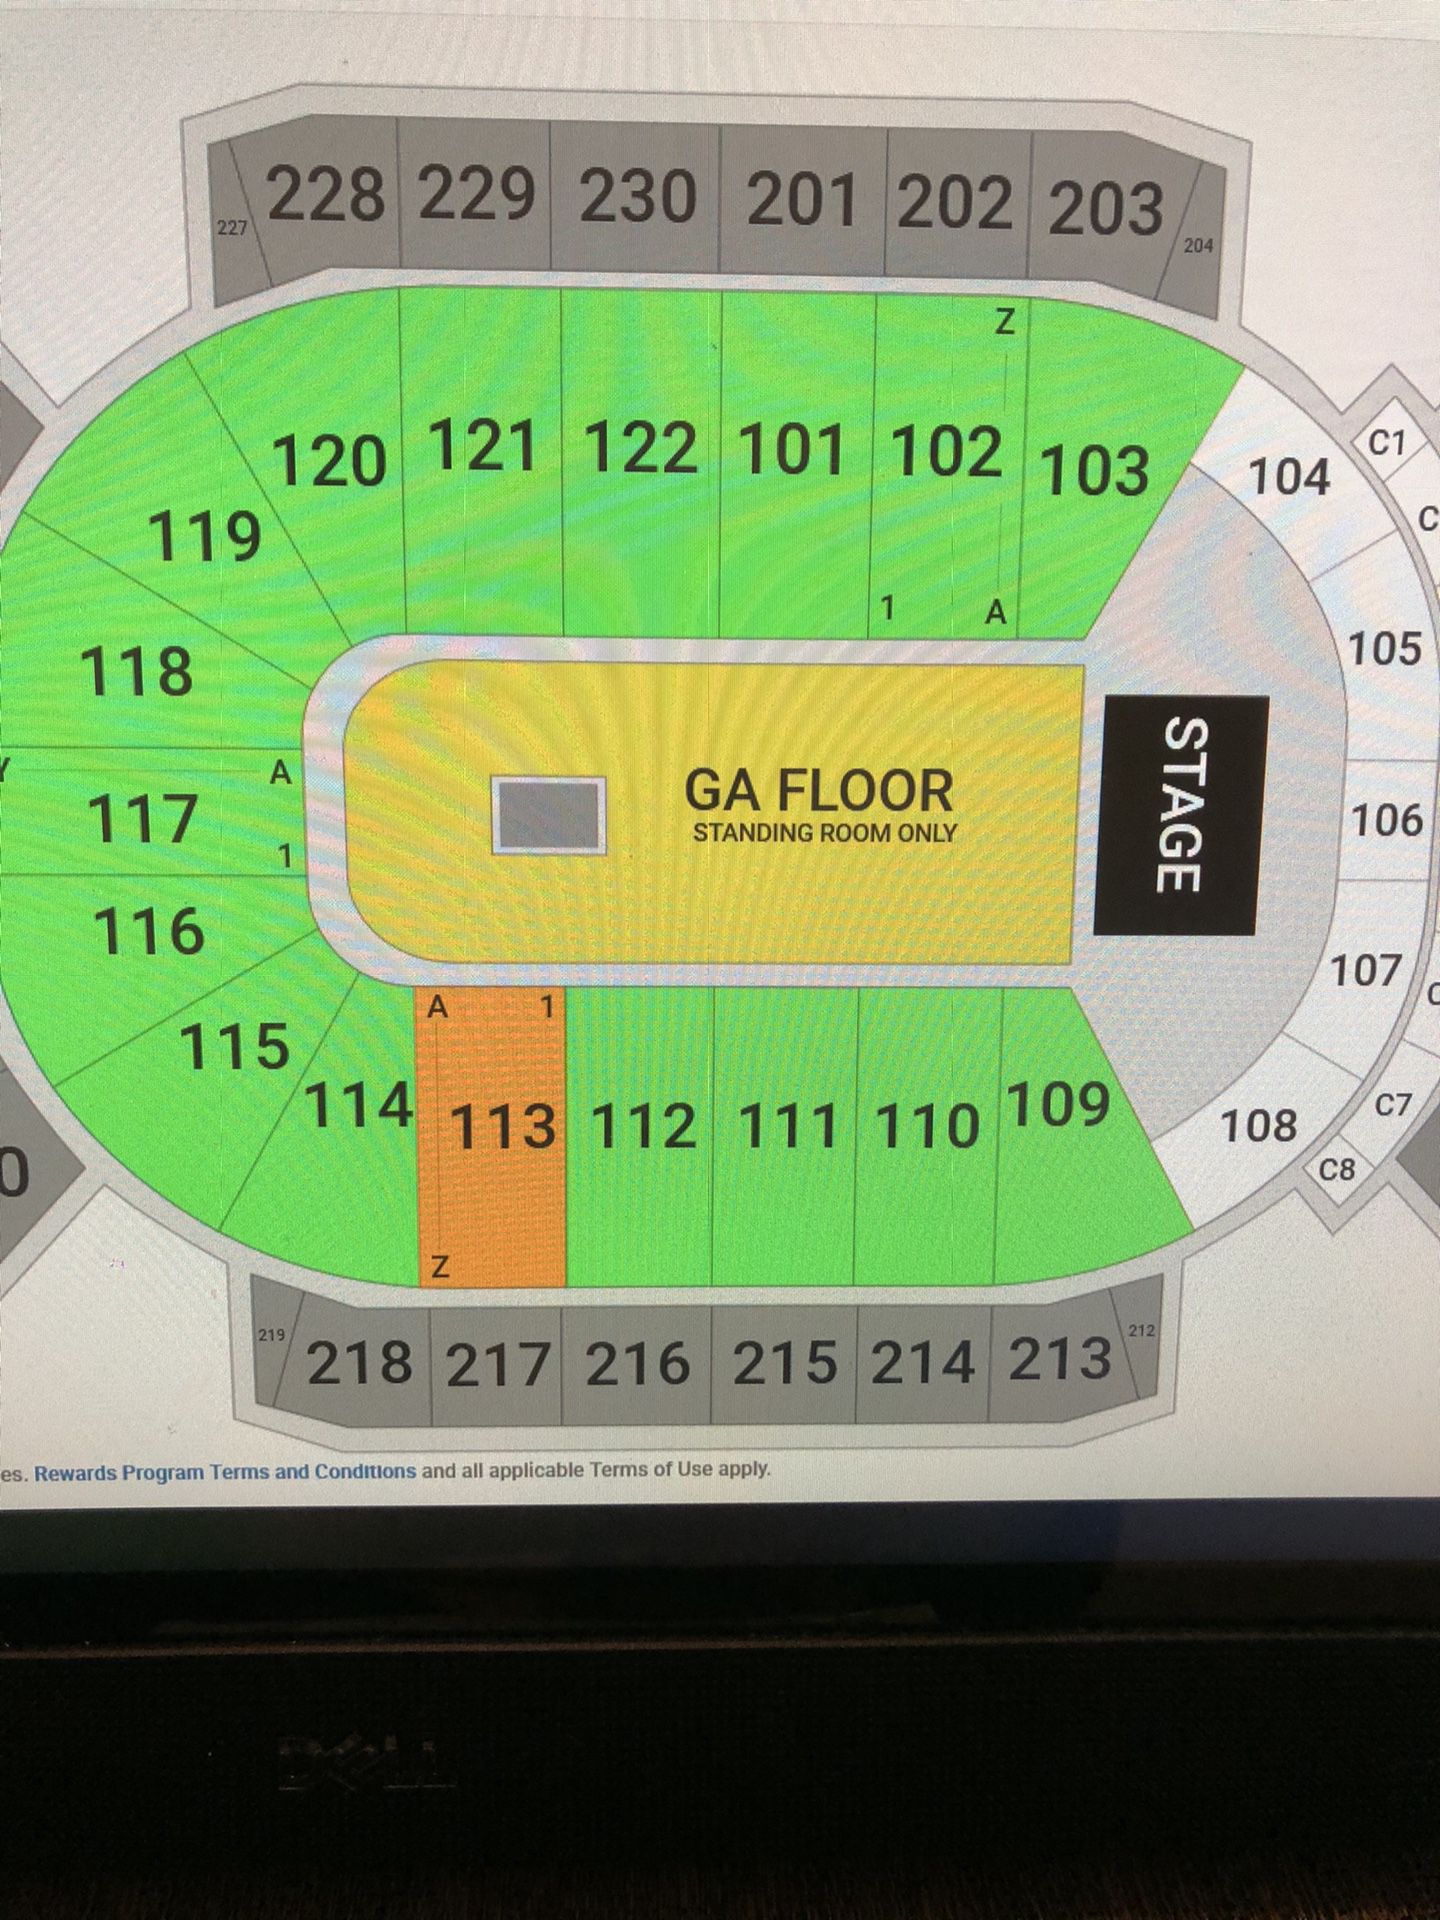 2 tix to Tyler the Creator concert 10/20/19 @ Gila River Arena. Lower level tix. Section 113, Row I seats 5&6.